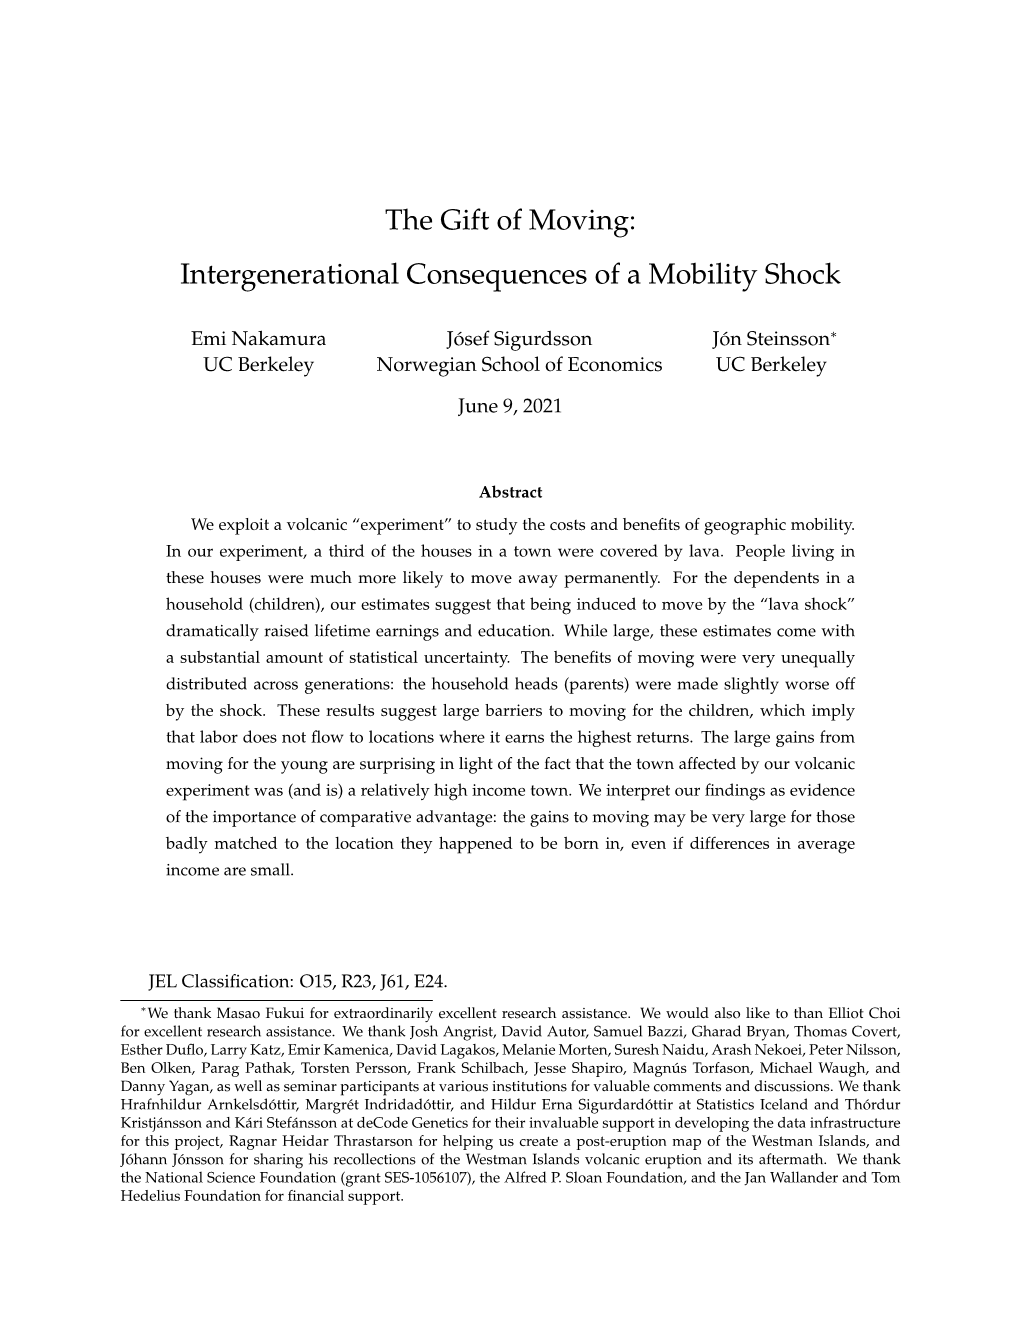 The Gift of Moving: Intergenerational Consequences of a Mobility Shock